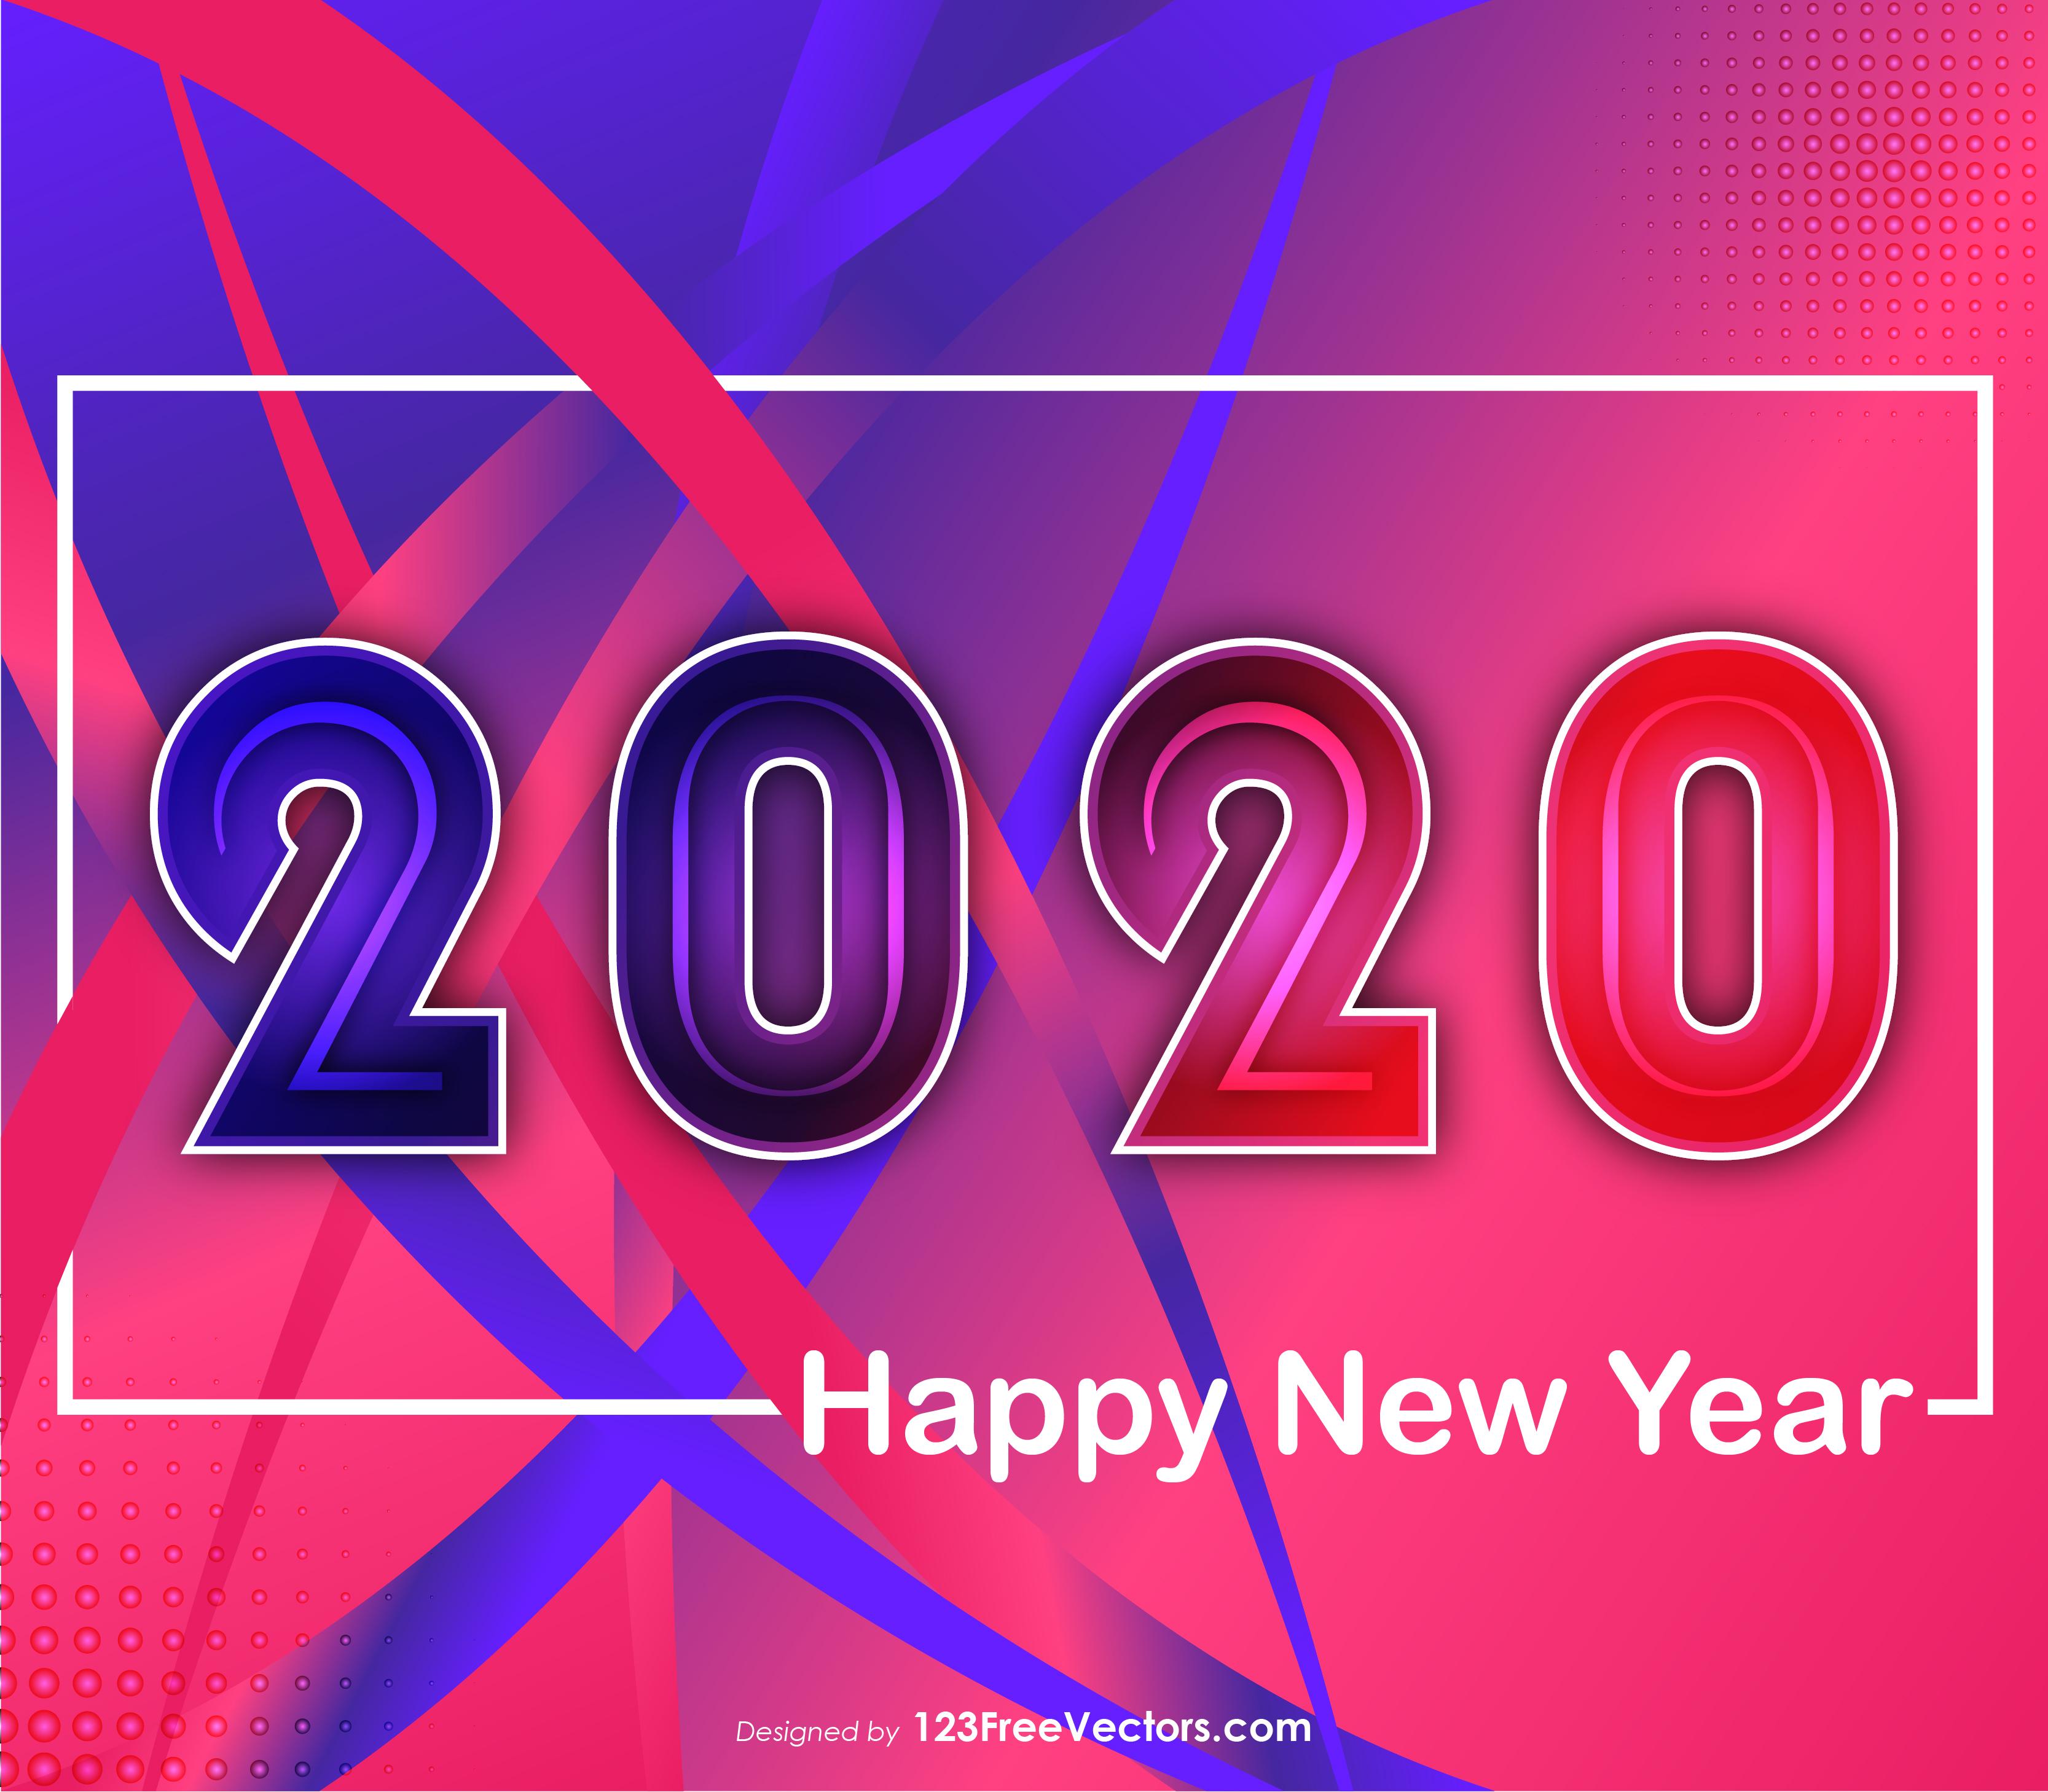 New Year 2020 Liquid Color Image